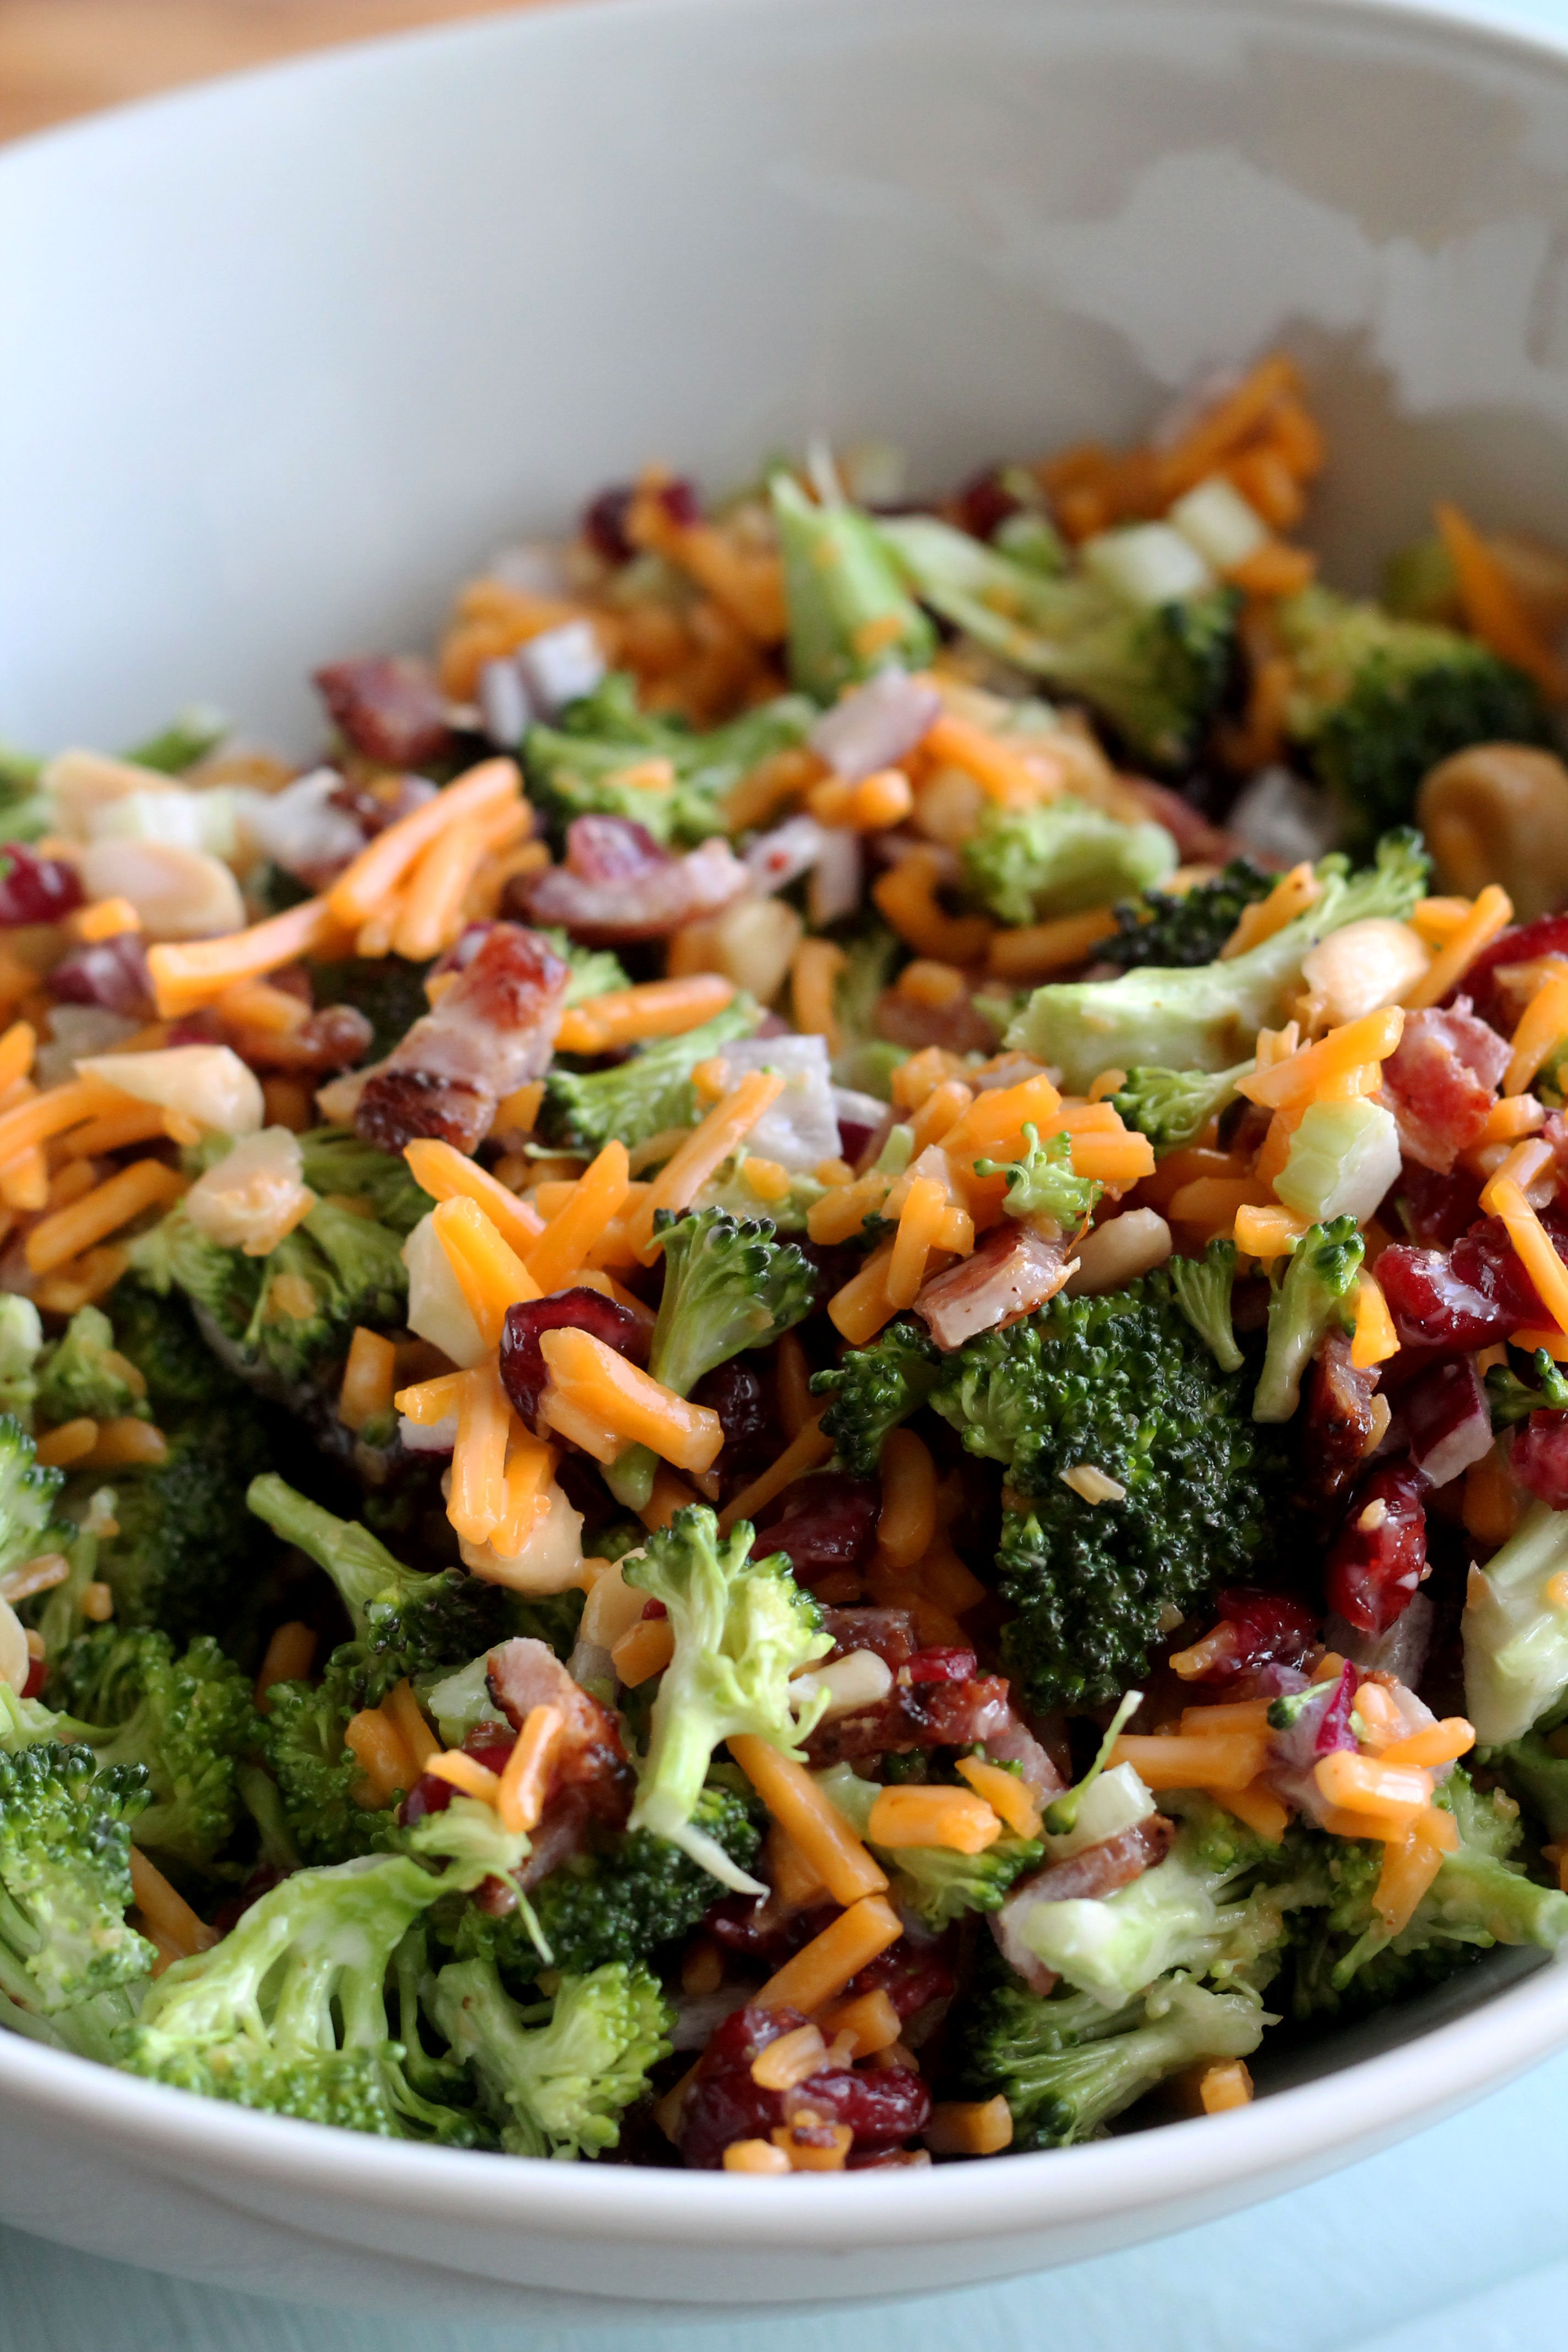 Every potluck needs this Broccoli Salad on the table. It's the perfect summer side dish!